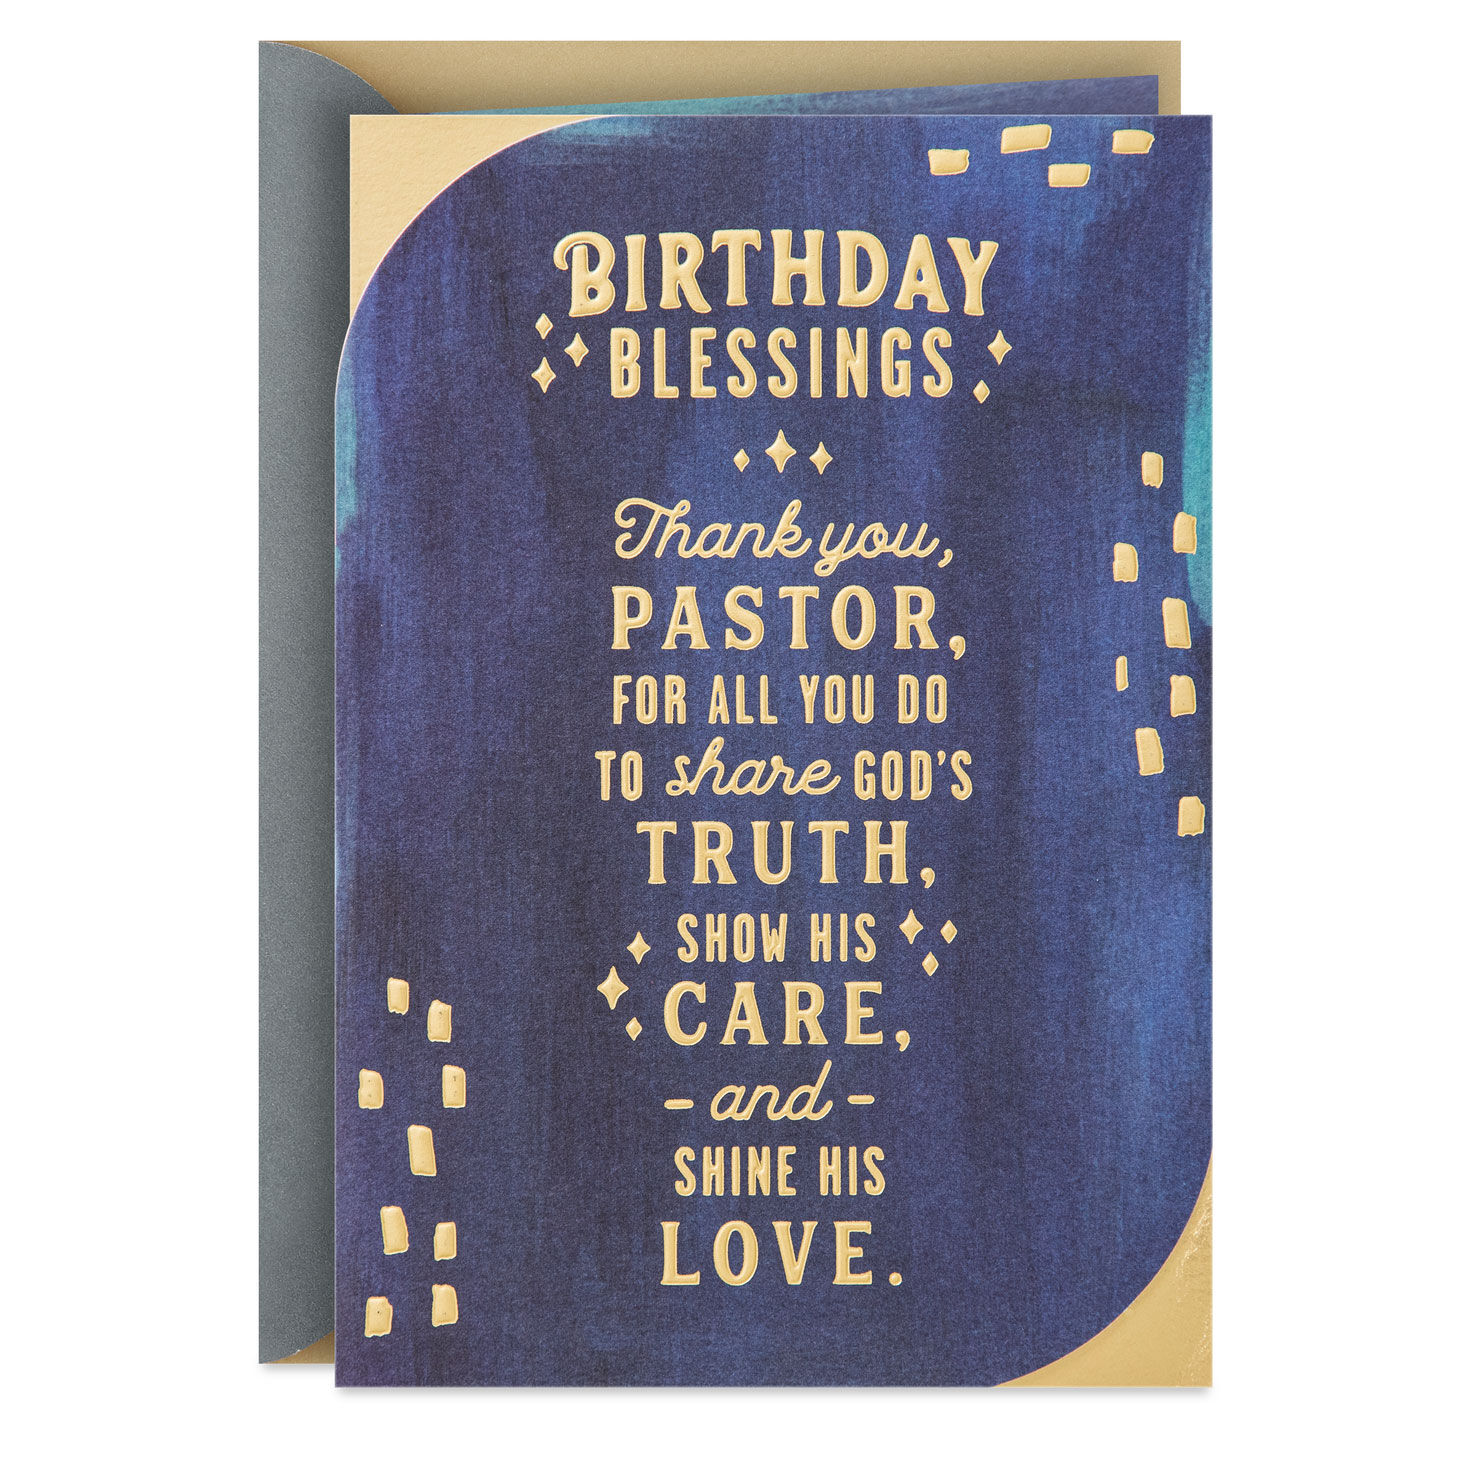 Thank You for All You Do Religious Birthday Card for Pastor for only USD 3.99 | Hallmark